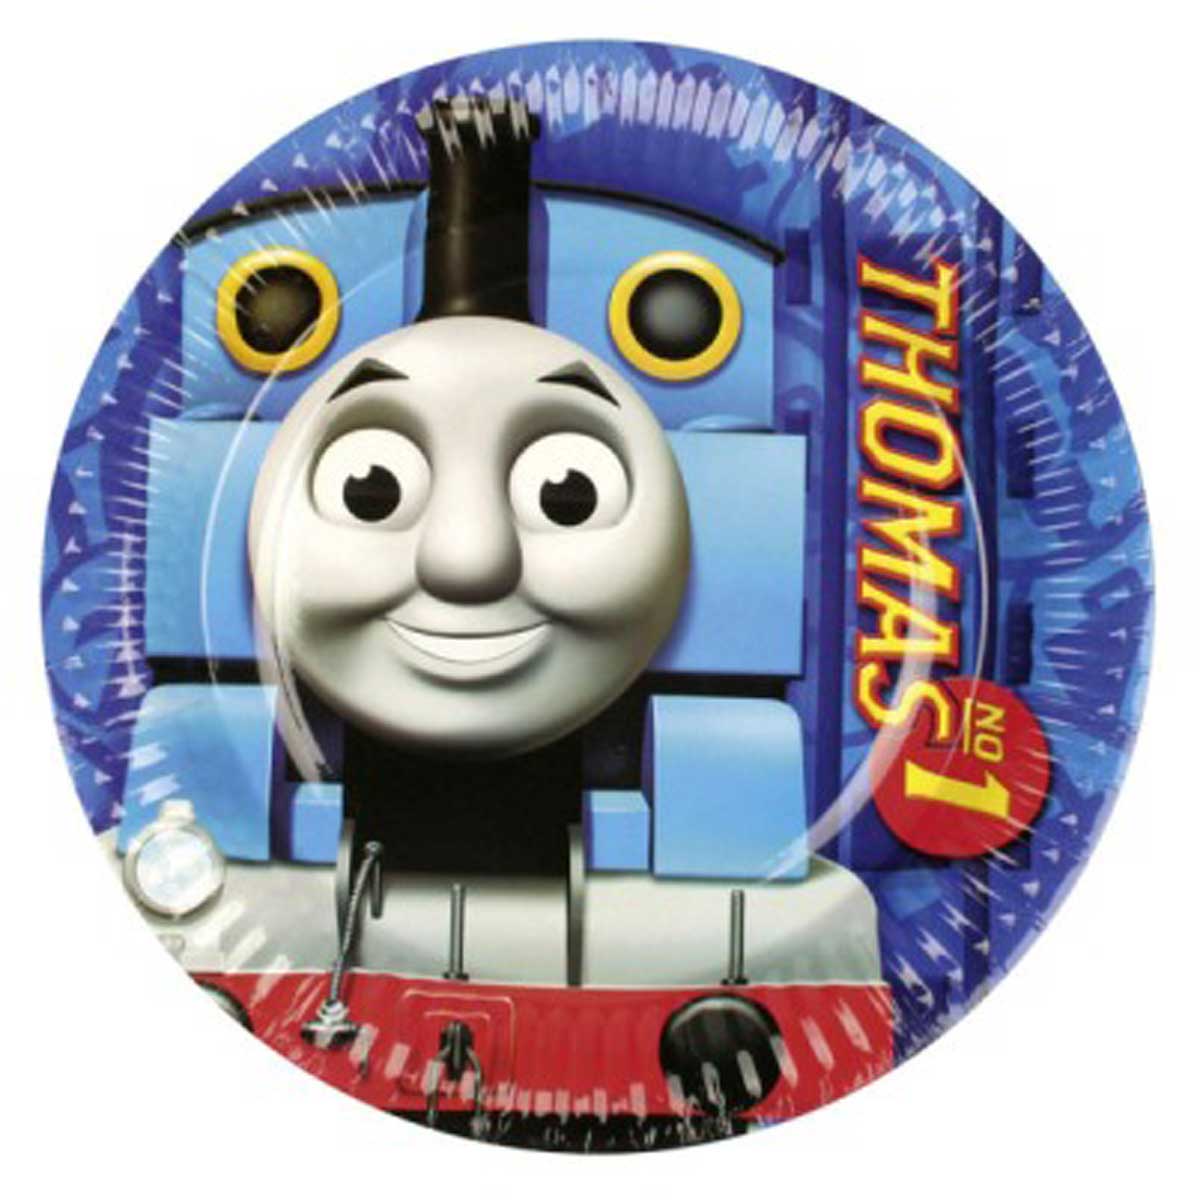 Thomas And Friends Plates 7in, 8pcs Printed Tableware - Party Centre - Party Centre